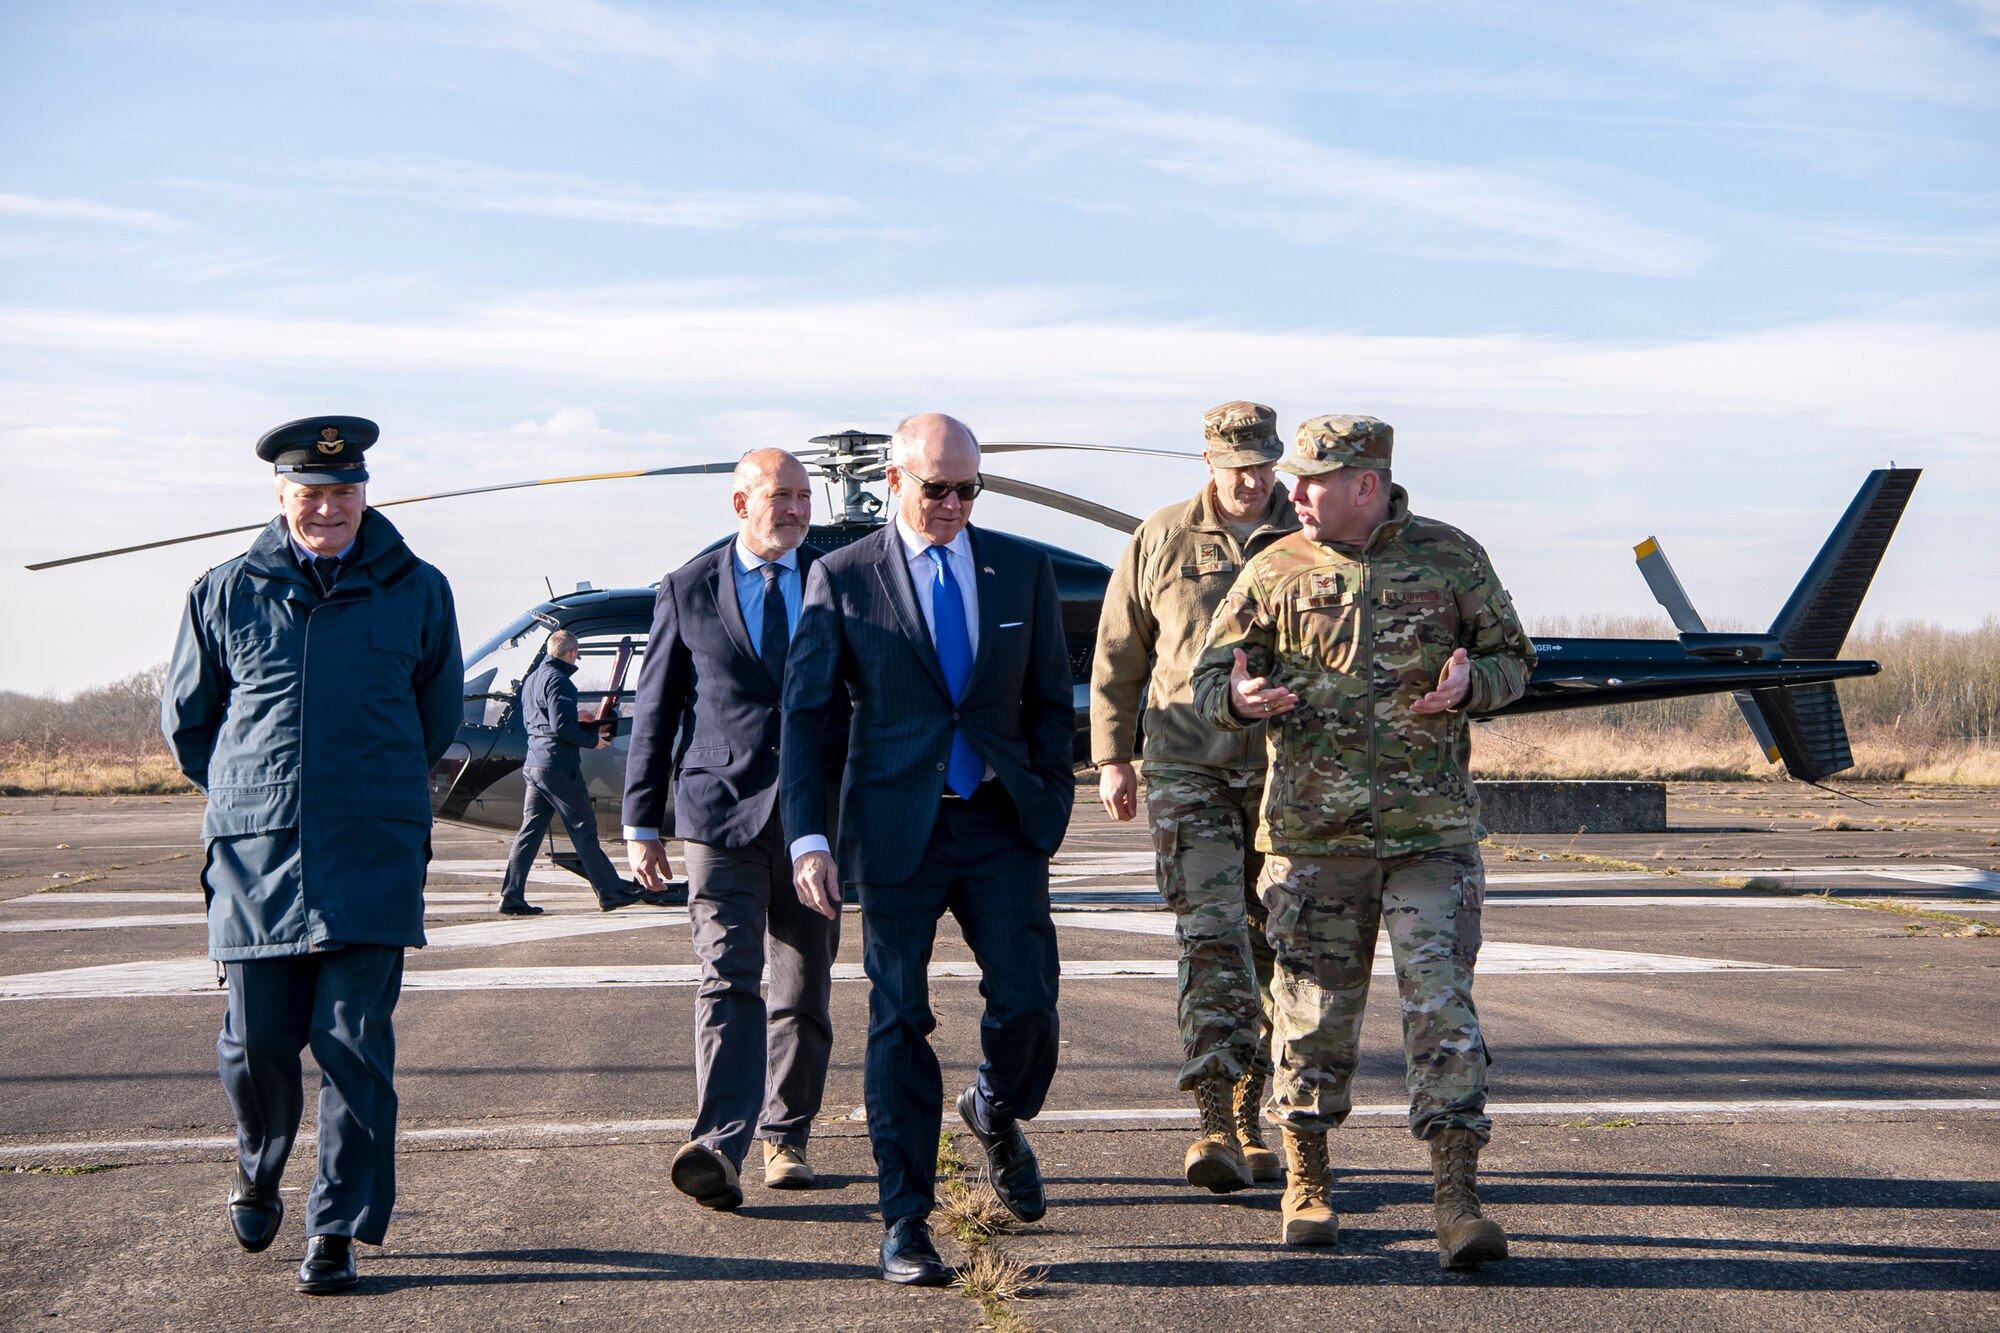 United States Ambassador to the United Kingdom, Robert Wood Johnson, (center), speaks with U.S. Air Force Col. Kurt Wendt, (right), 501st Combat Support Wing commander, during a visit to RAF Molesworth, England, Feb. 7, 2020. Johnson visited RAF Molesworth, which is part of the 501st Combat Support Wing, to build more relationships with personnel and gain a better understanding of their overall mission, capabilities and comprehensive duties. (U.S. Air Force photo by Senior Airman Eugene Oliver)